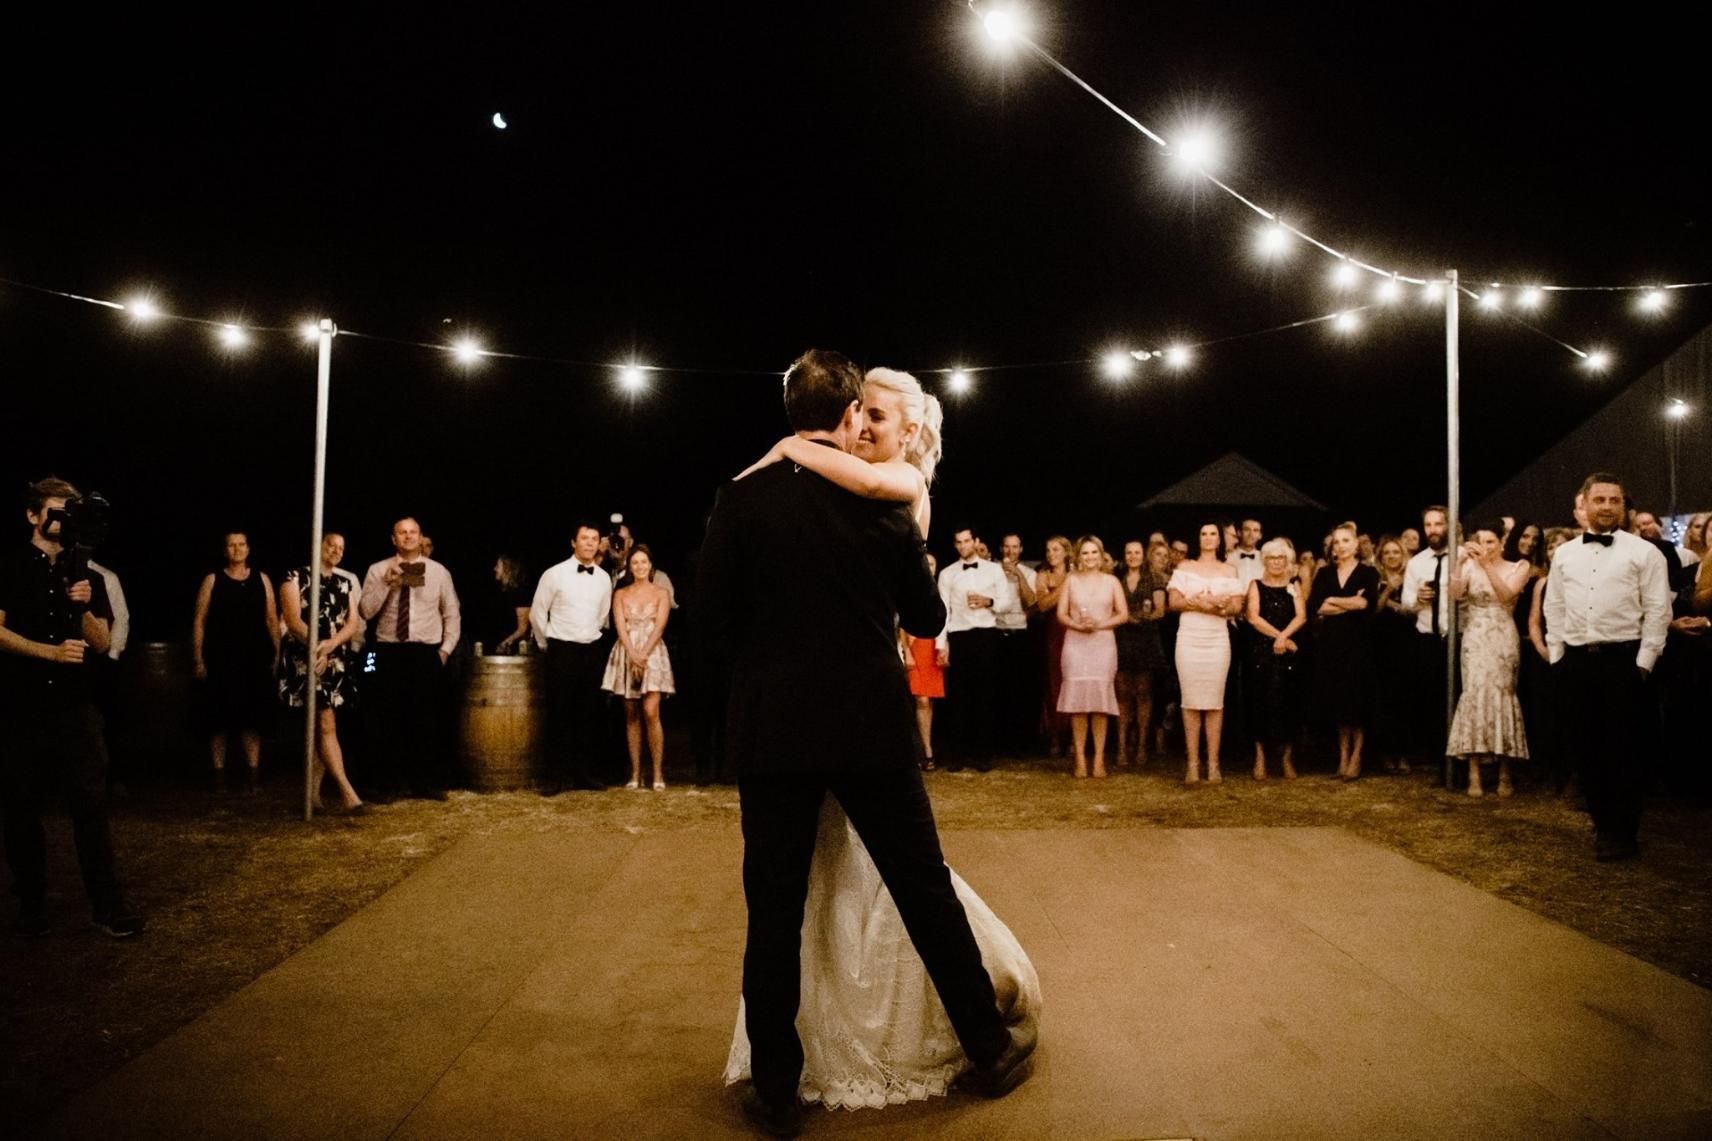 A Bride and Groom are Dancing on a Dance Floor at Their Wedding Reception — Event Hire in Wodonga, NSW